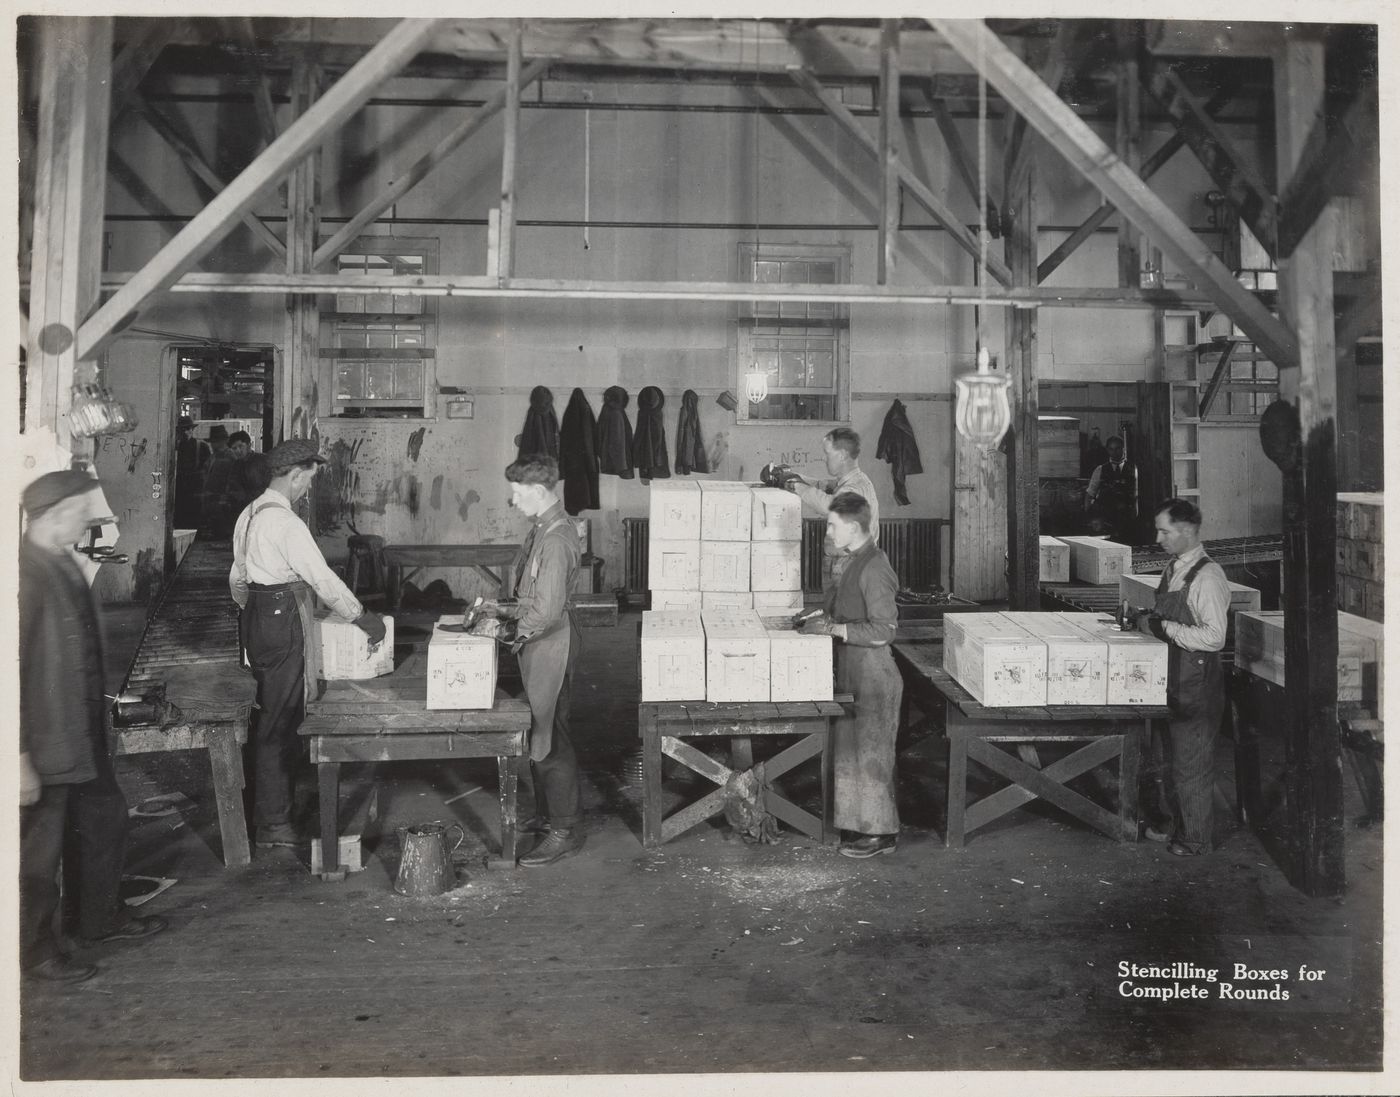 Interior view of workers stencilling boxes for complete rounds at the Energite Explosives Plant No. 3, the Shell Loading Plant, Renfrew, Ontario, Canada